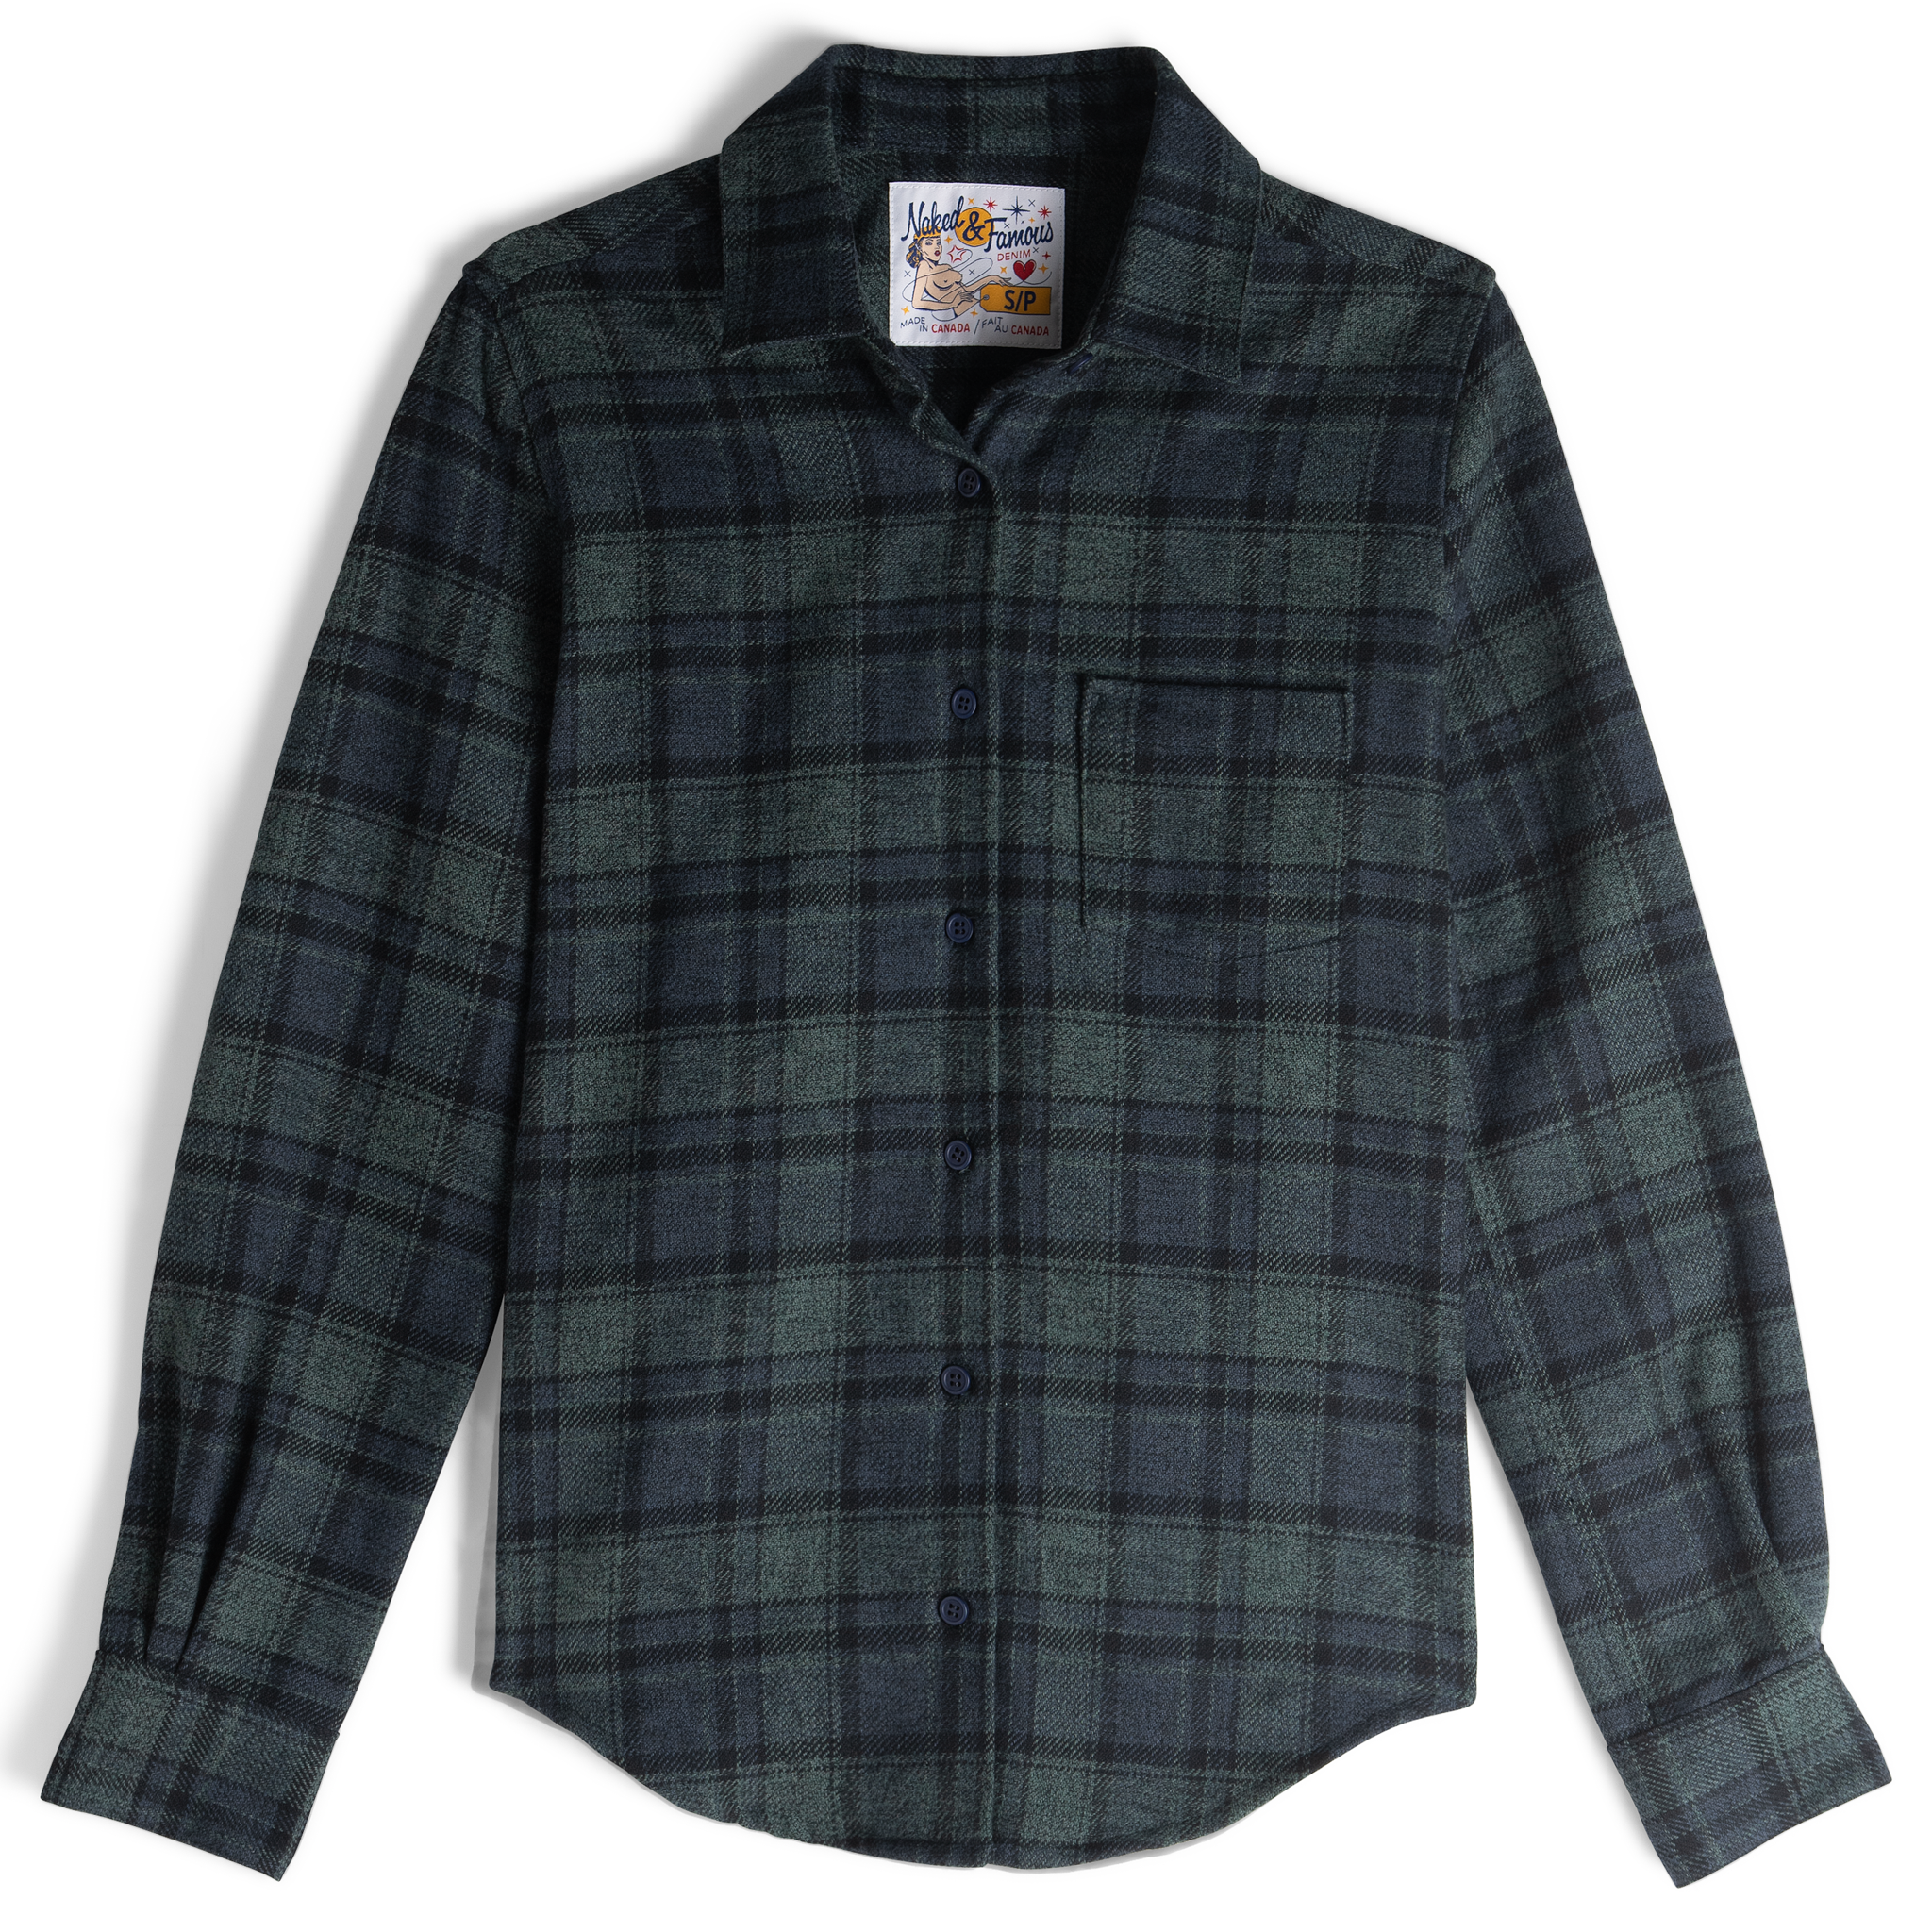  Women’s Country Shirt - Heavy Vintage Flannel - Blue/Green - Flat Front 